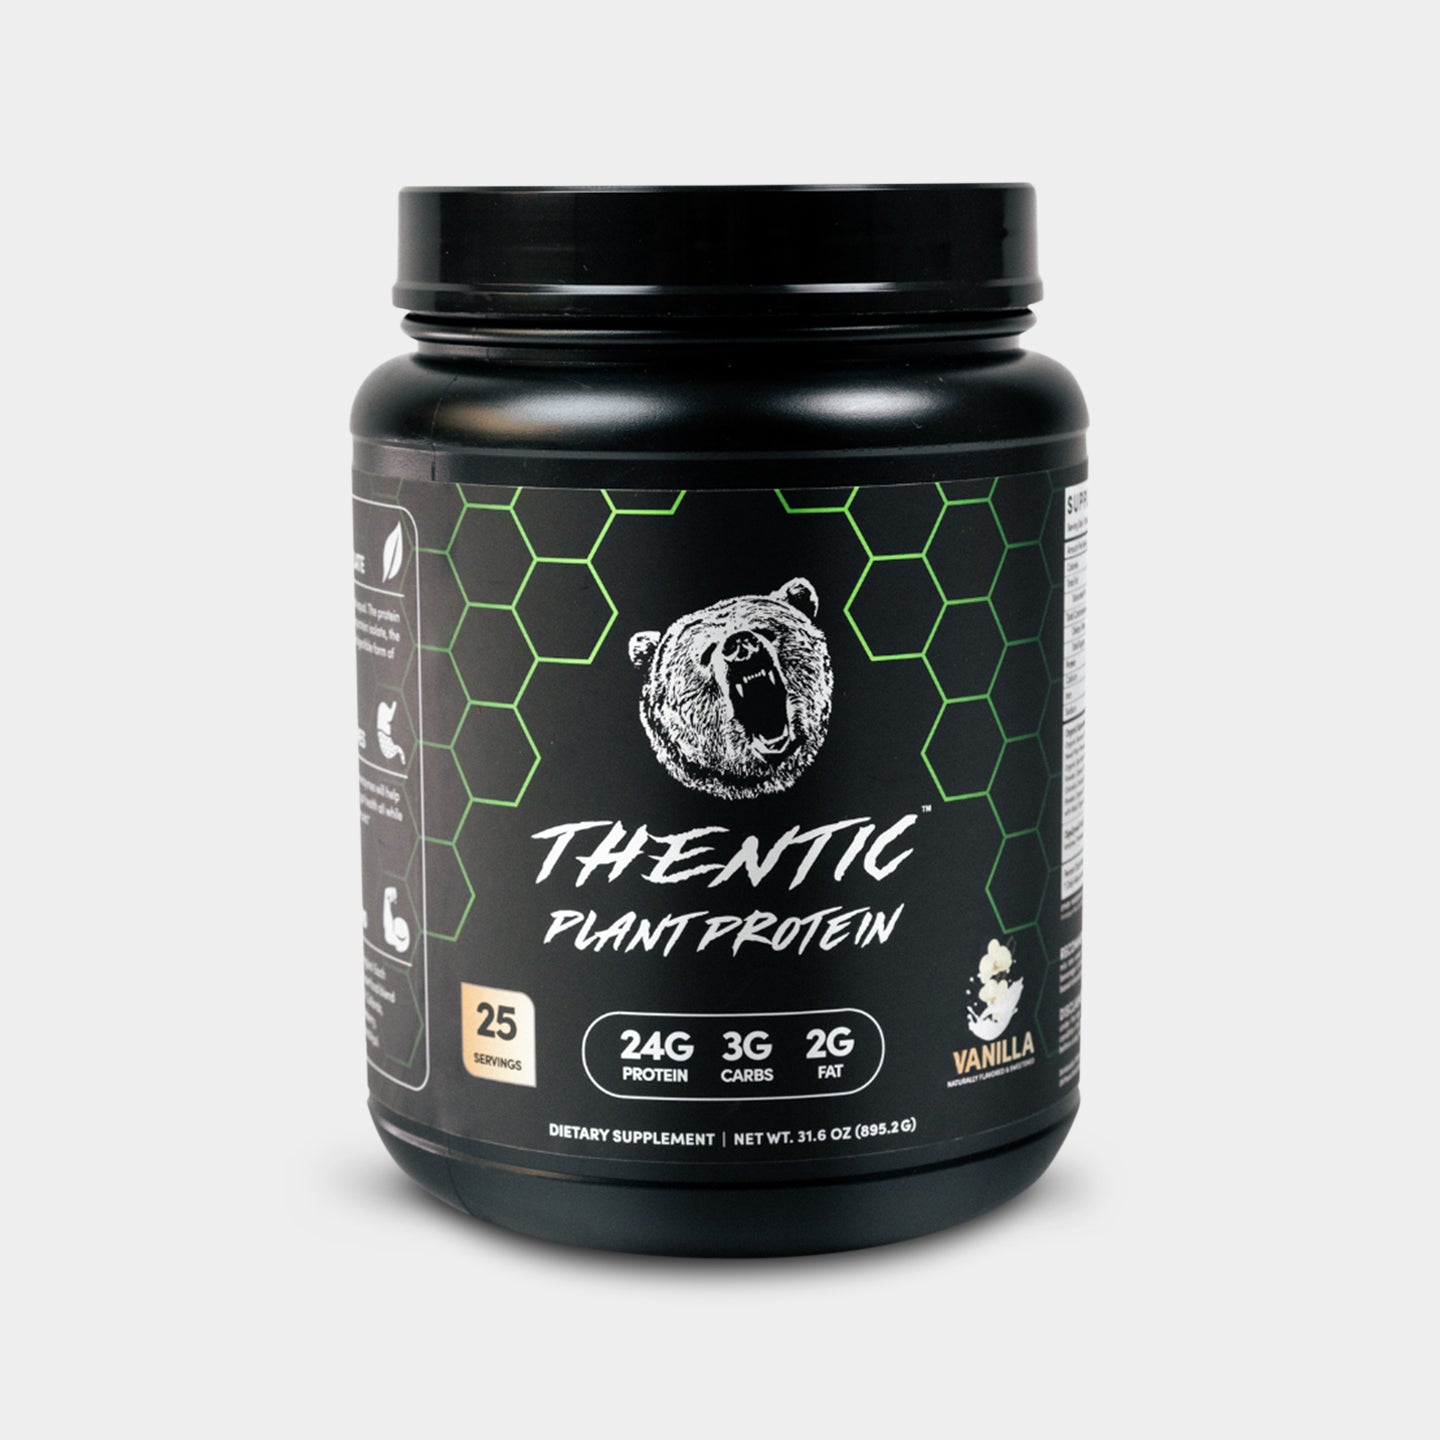 Thentic Plant Protein, Vanilla, 25 Servings A1